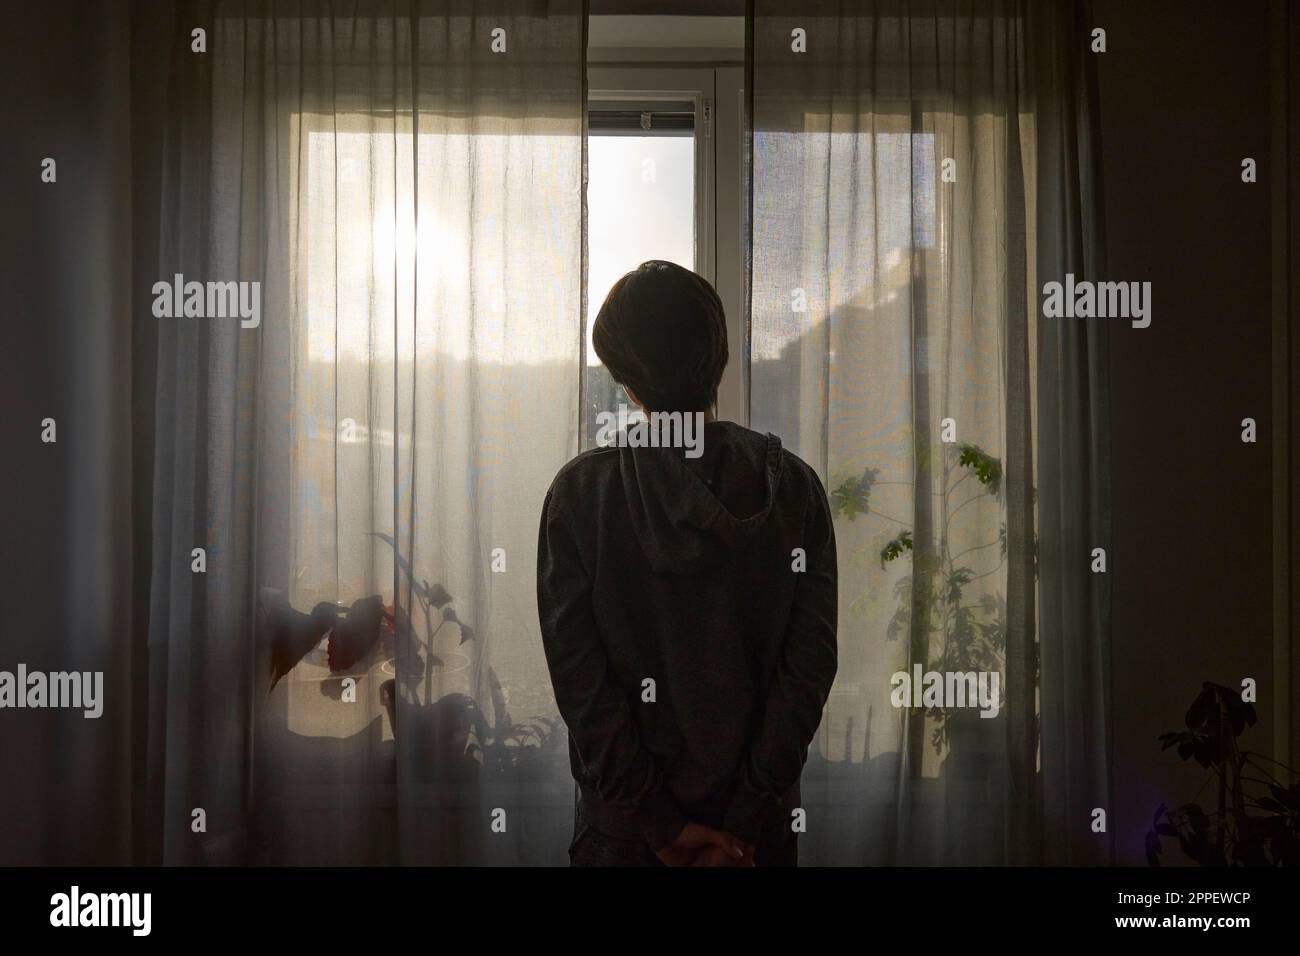 Silhouette of person standing in front of window Stock Photo